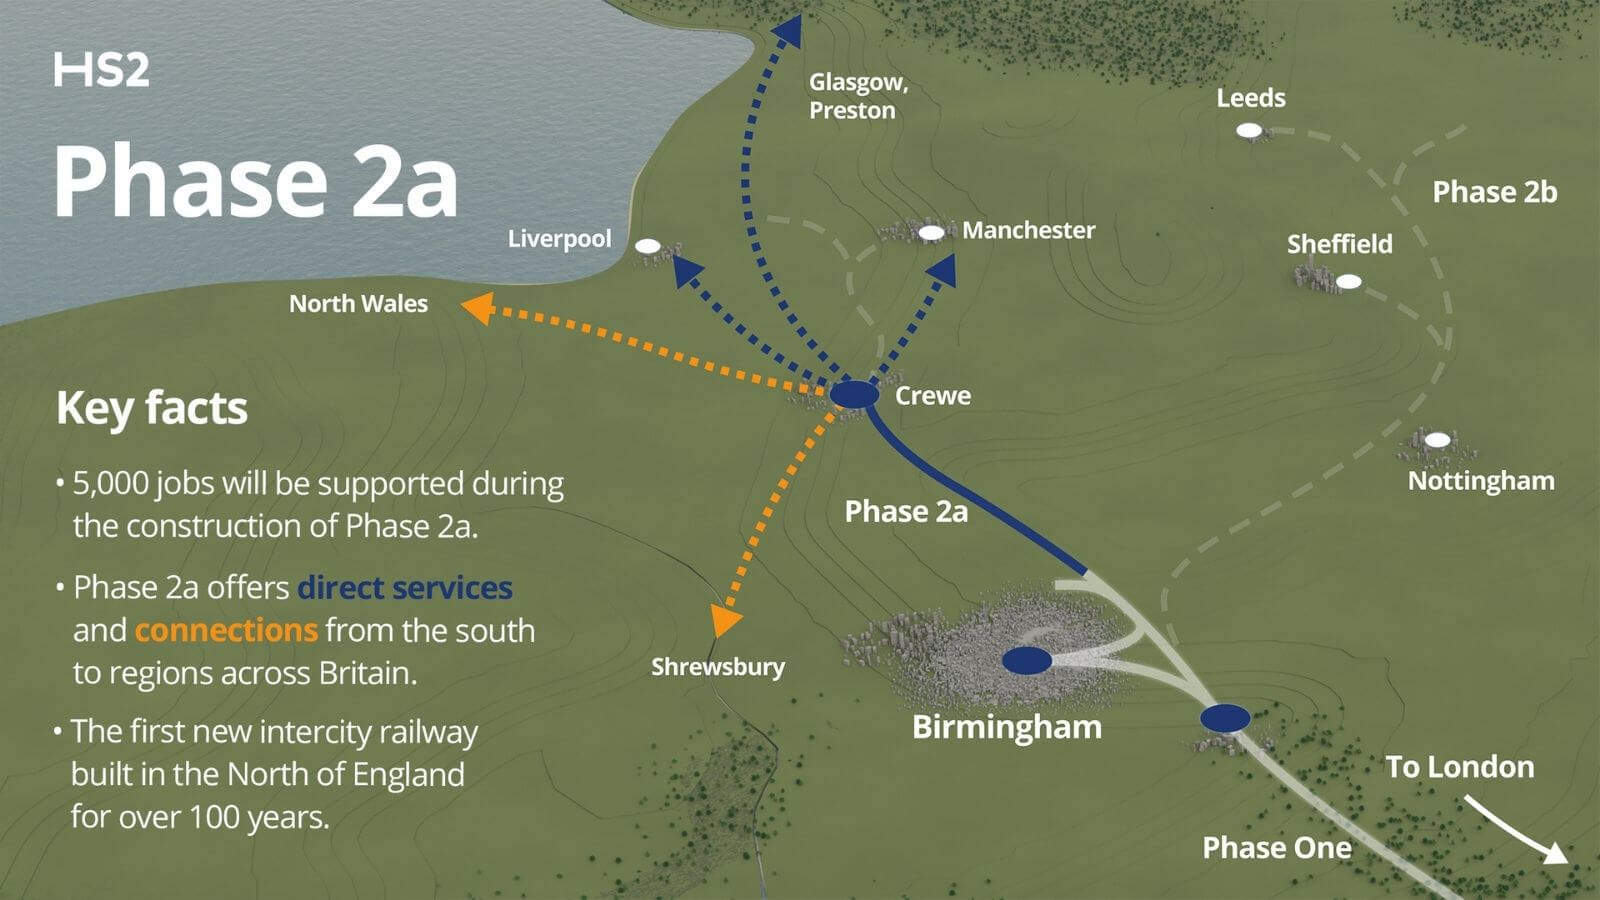 HS2 Phase 2a has now been approved up to Crewe